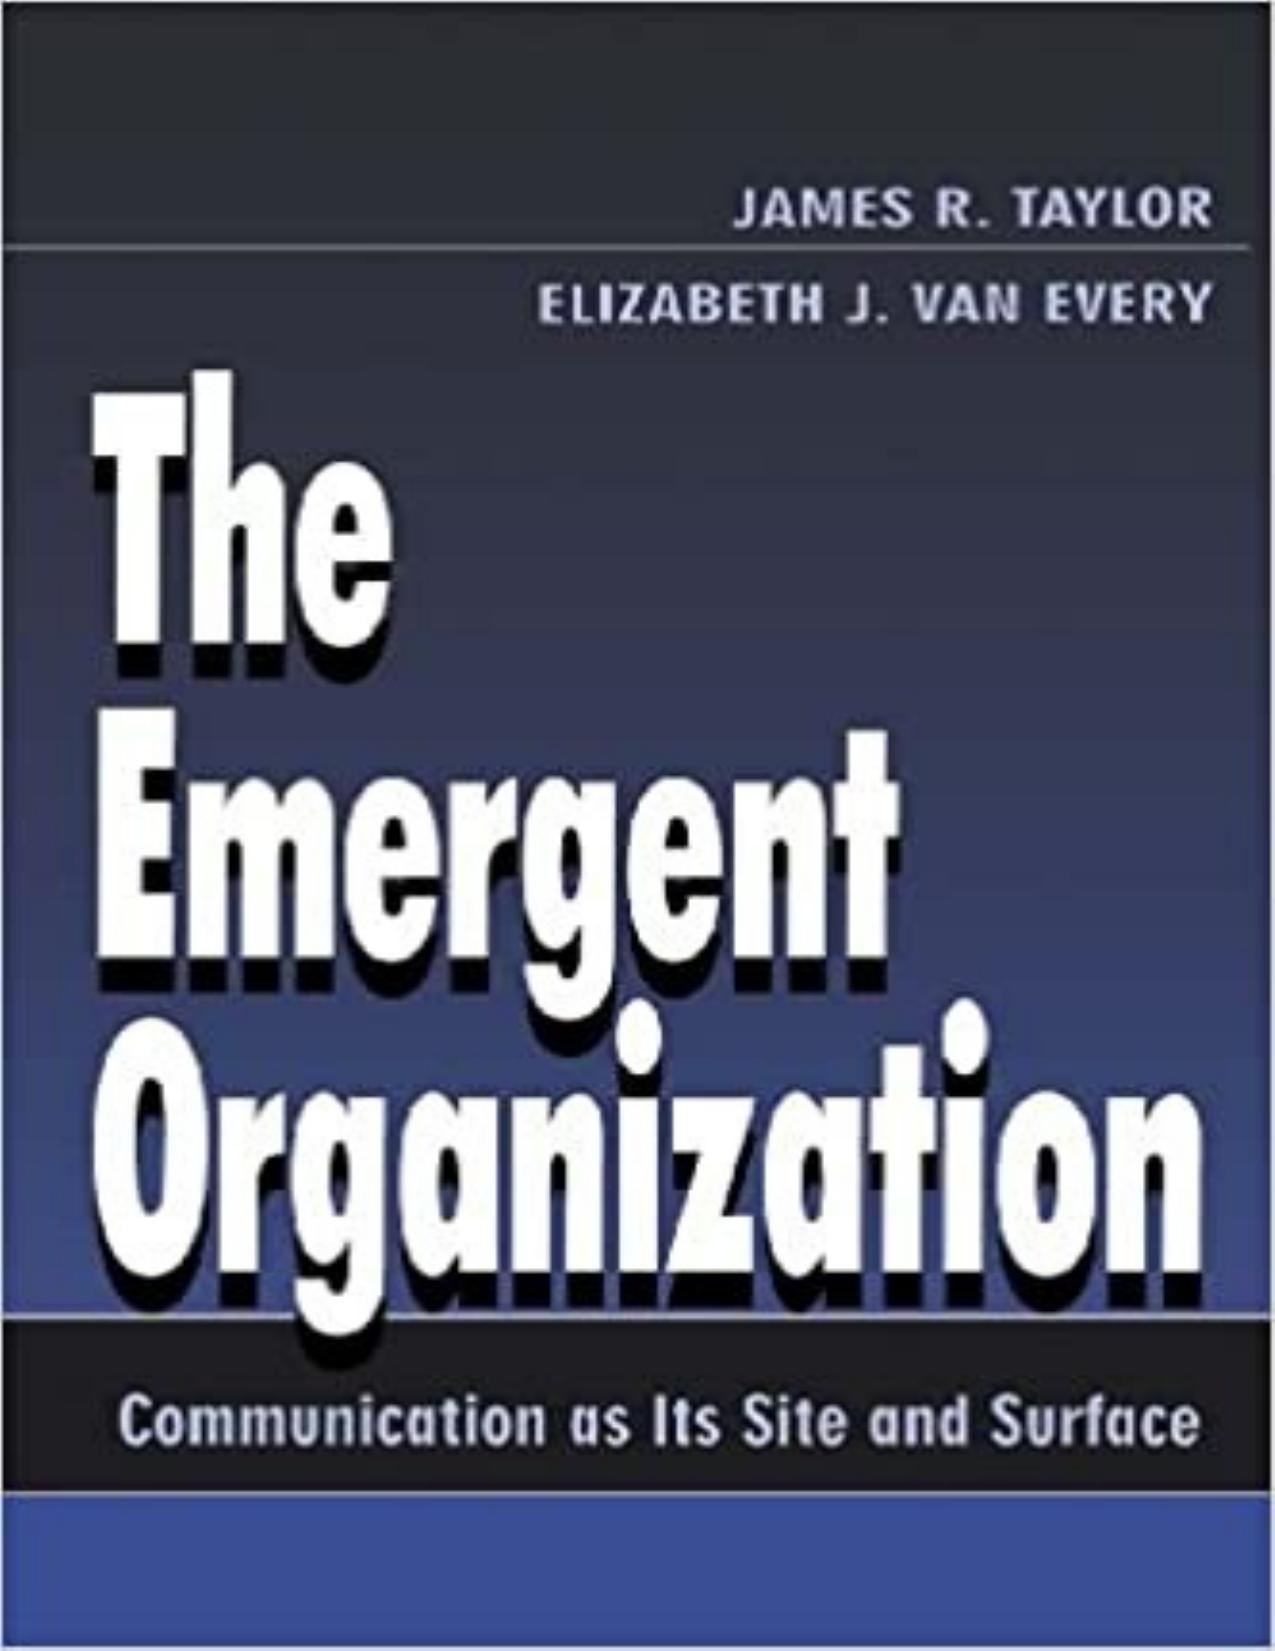 Emergent Organization Communication As Its Site and Surface By James R. Taylor, The - James R. Taylor, Elizabeth J. Van Every.jpg